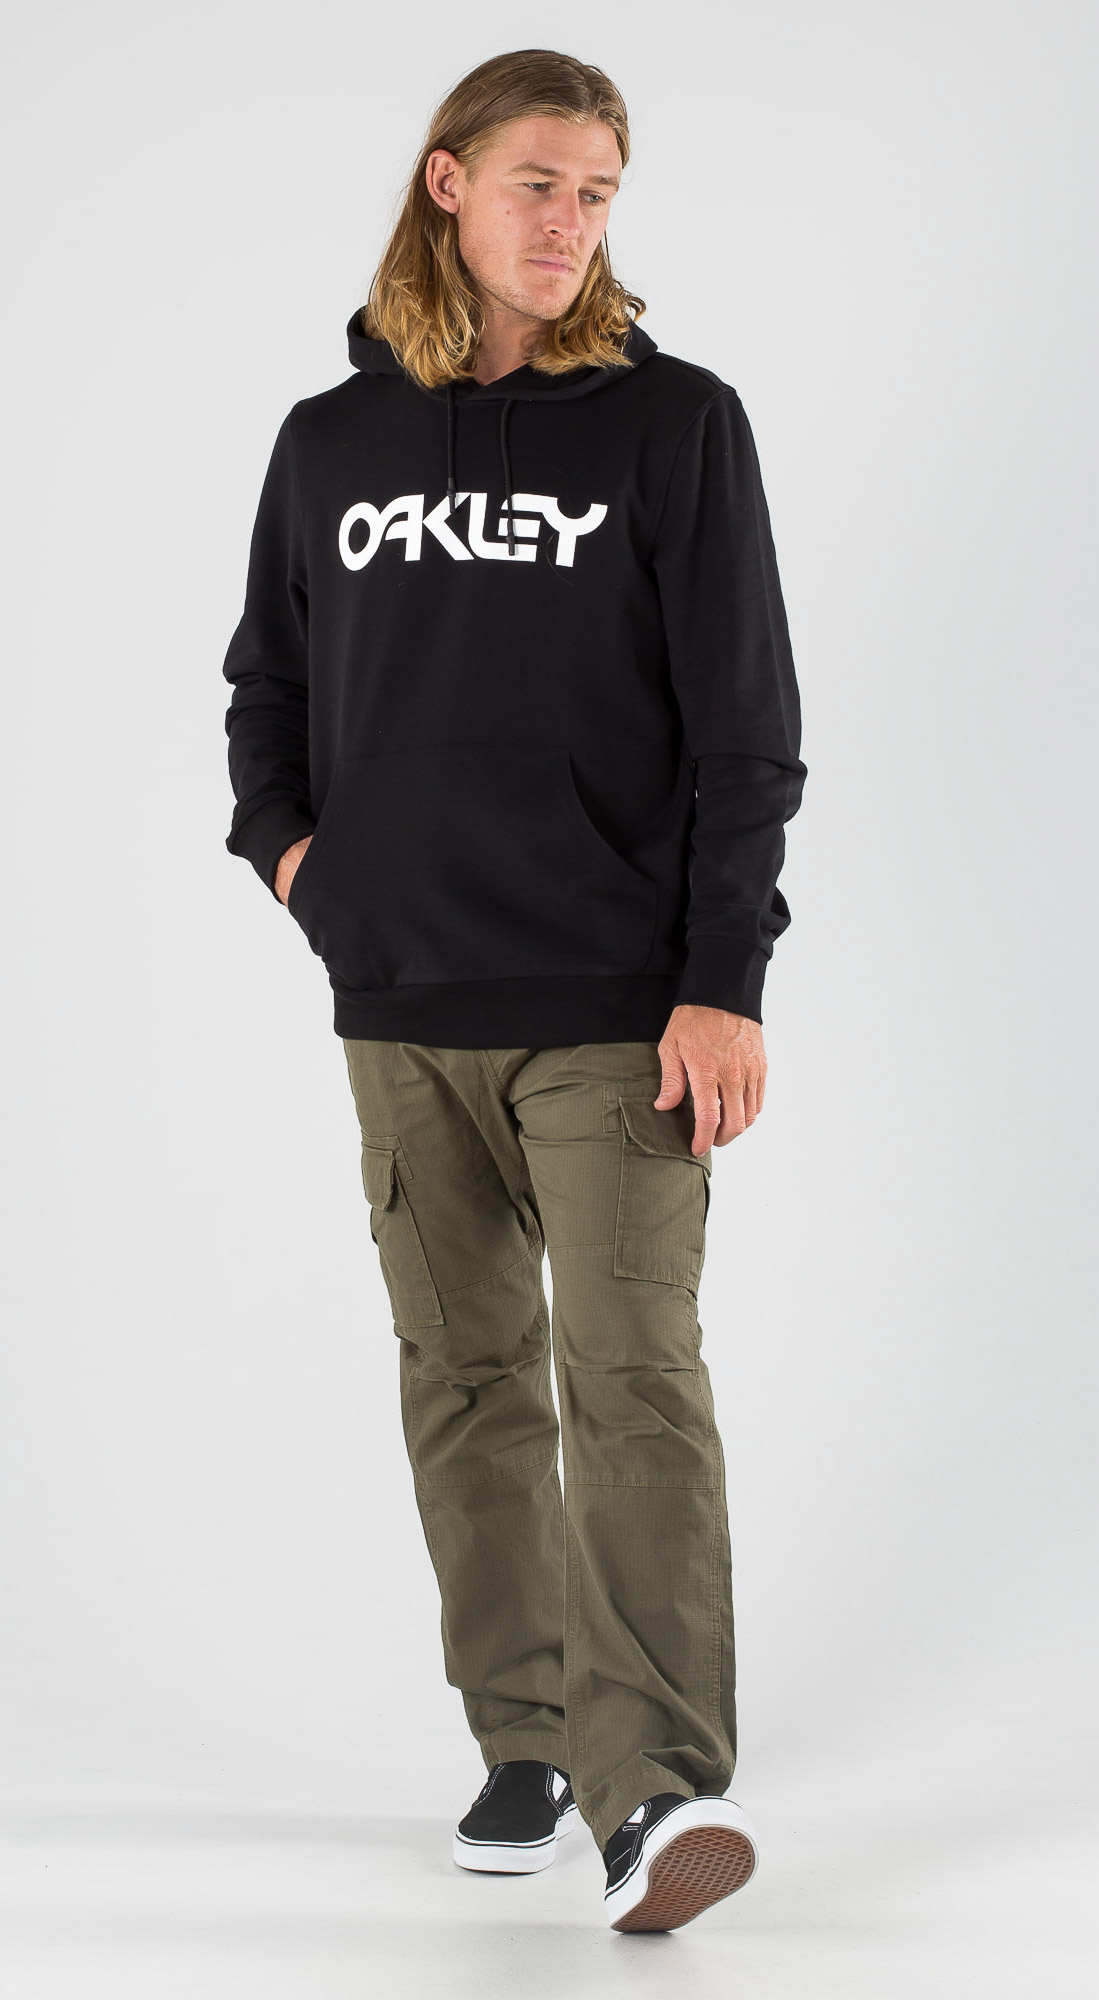 oakley outfit